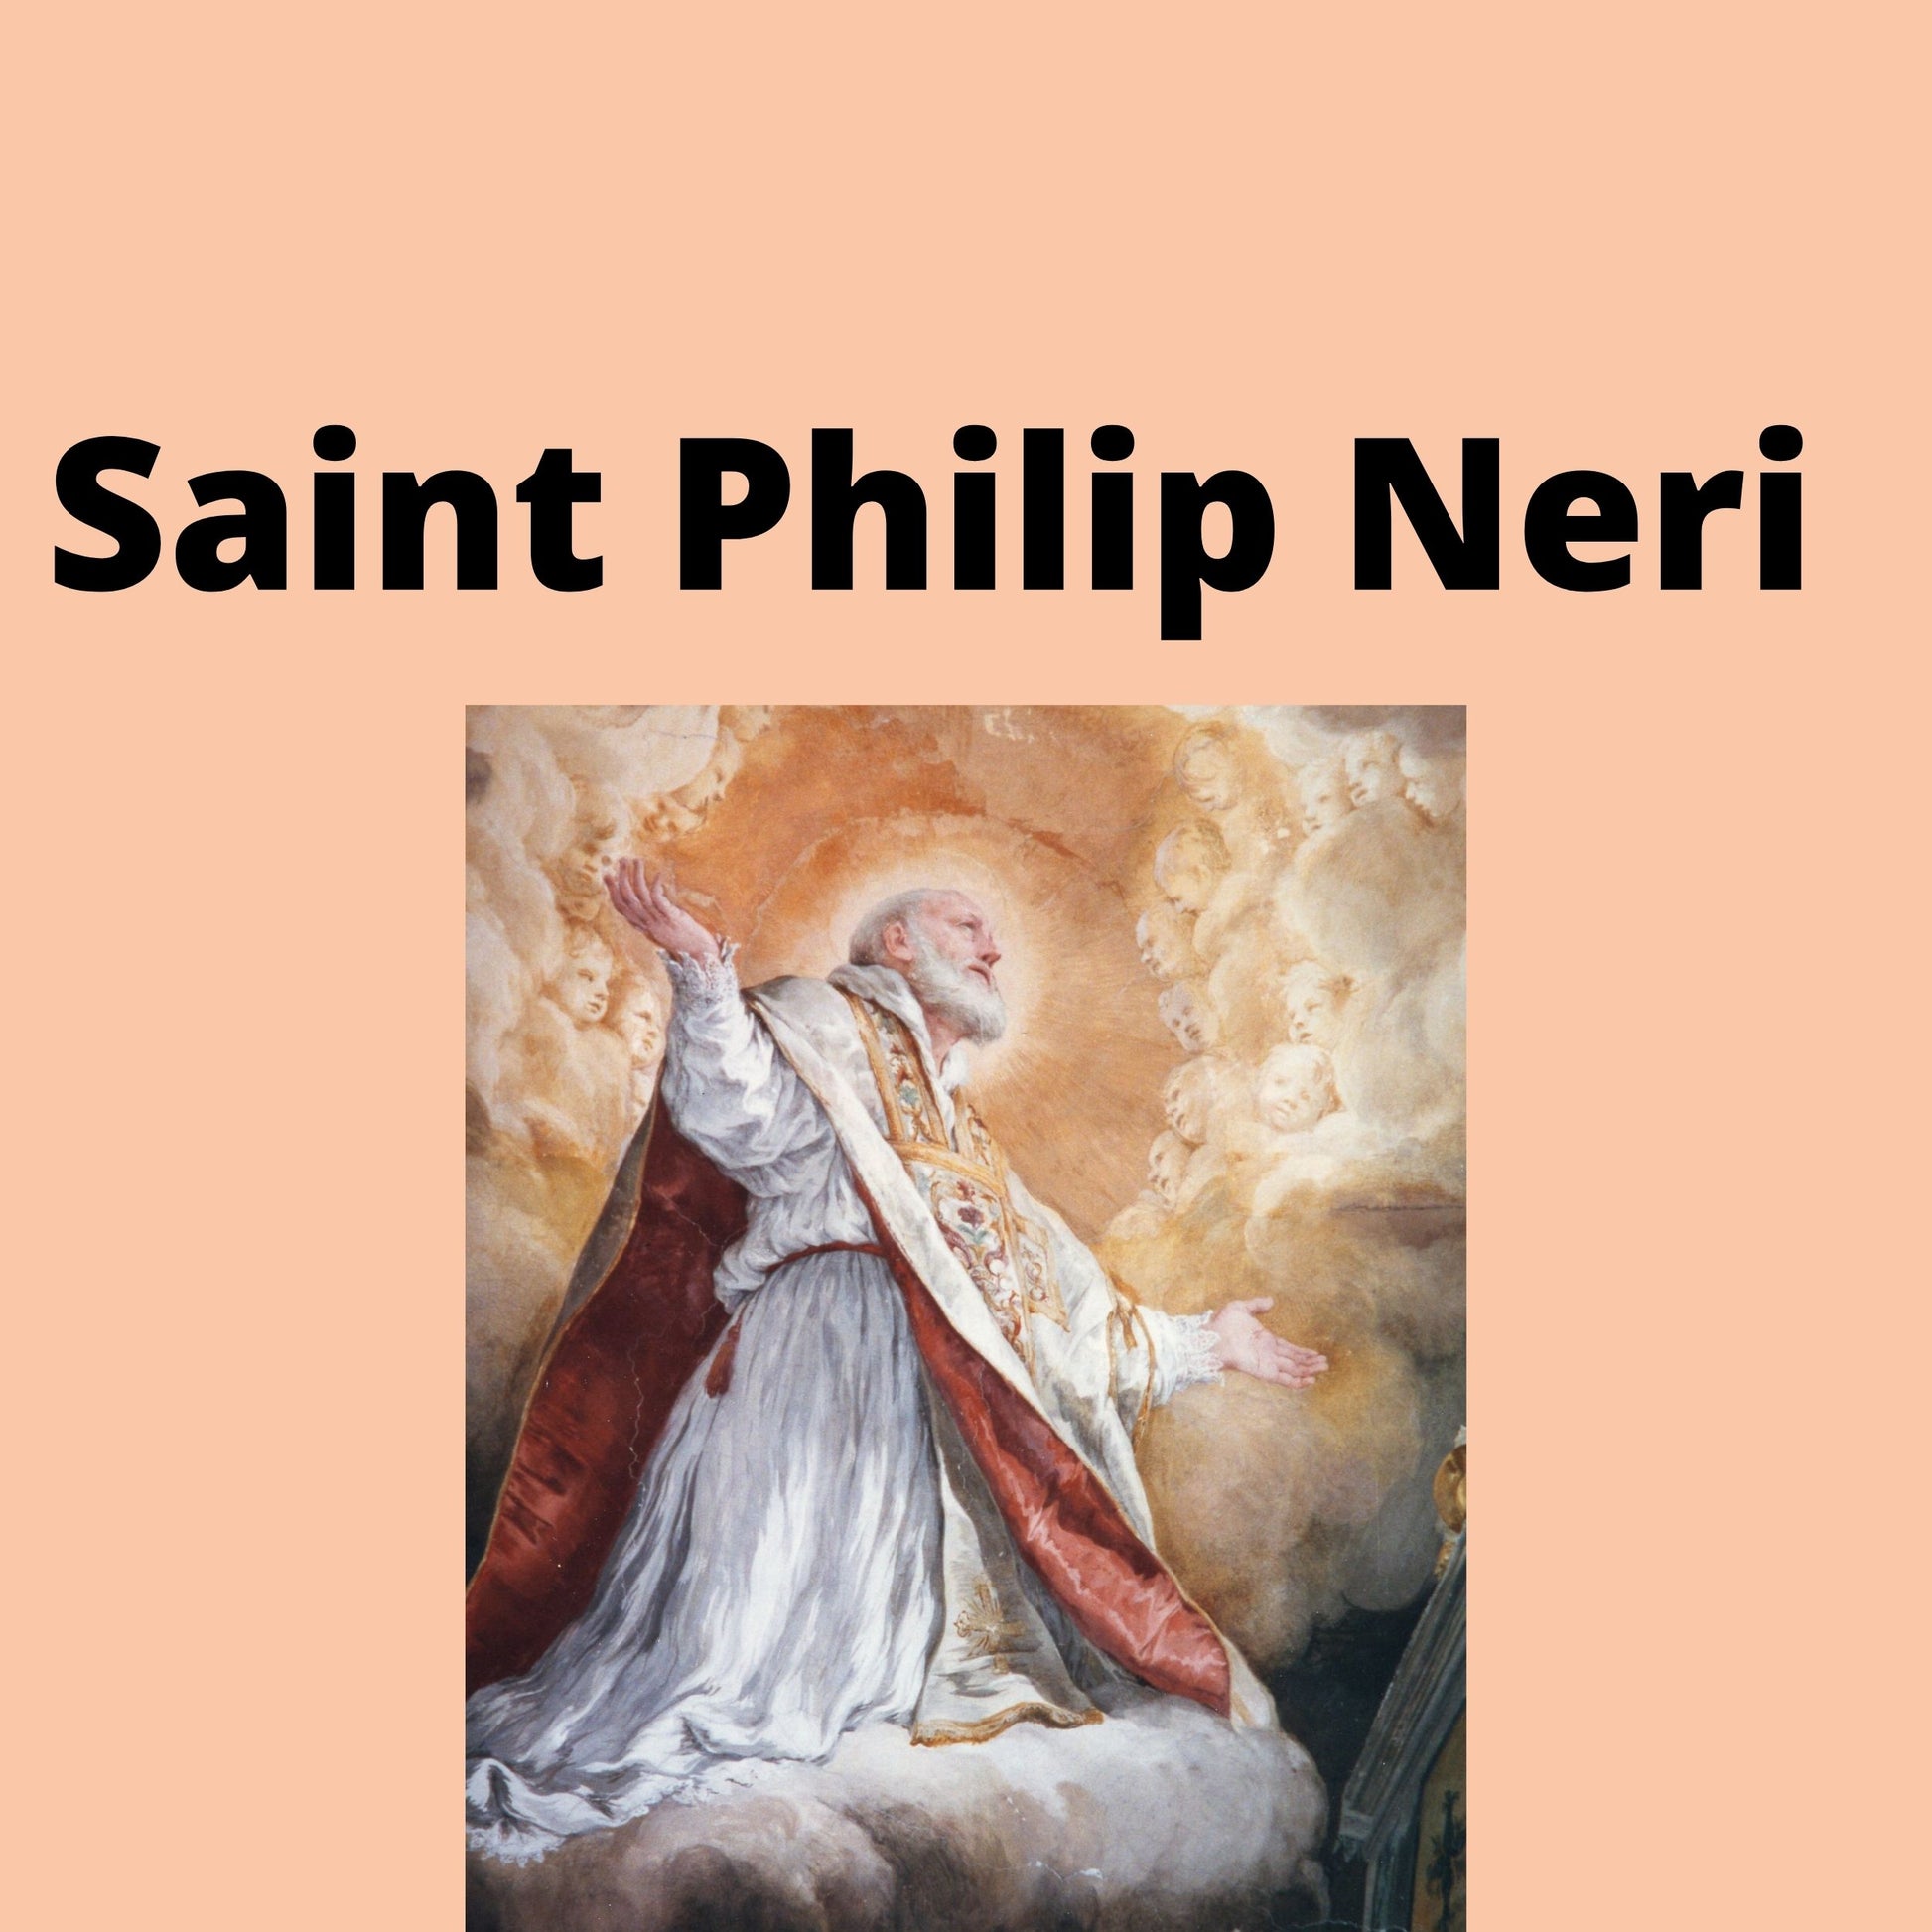 Saint Philip Neri Video Download MP4 - Bob and Penny Lord